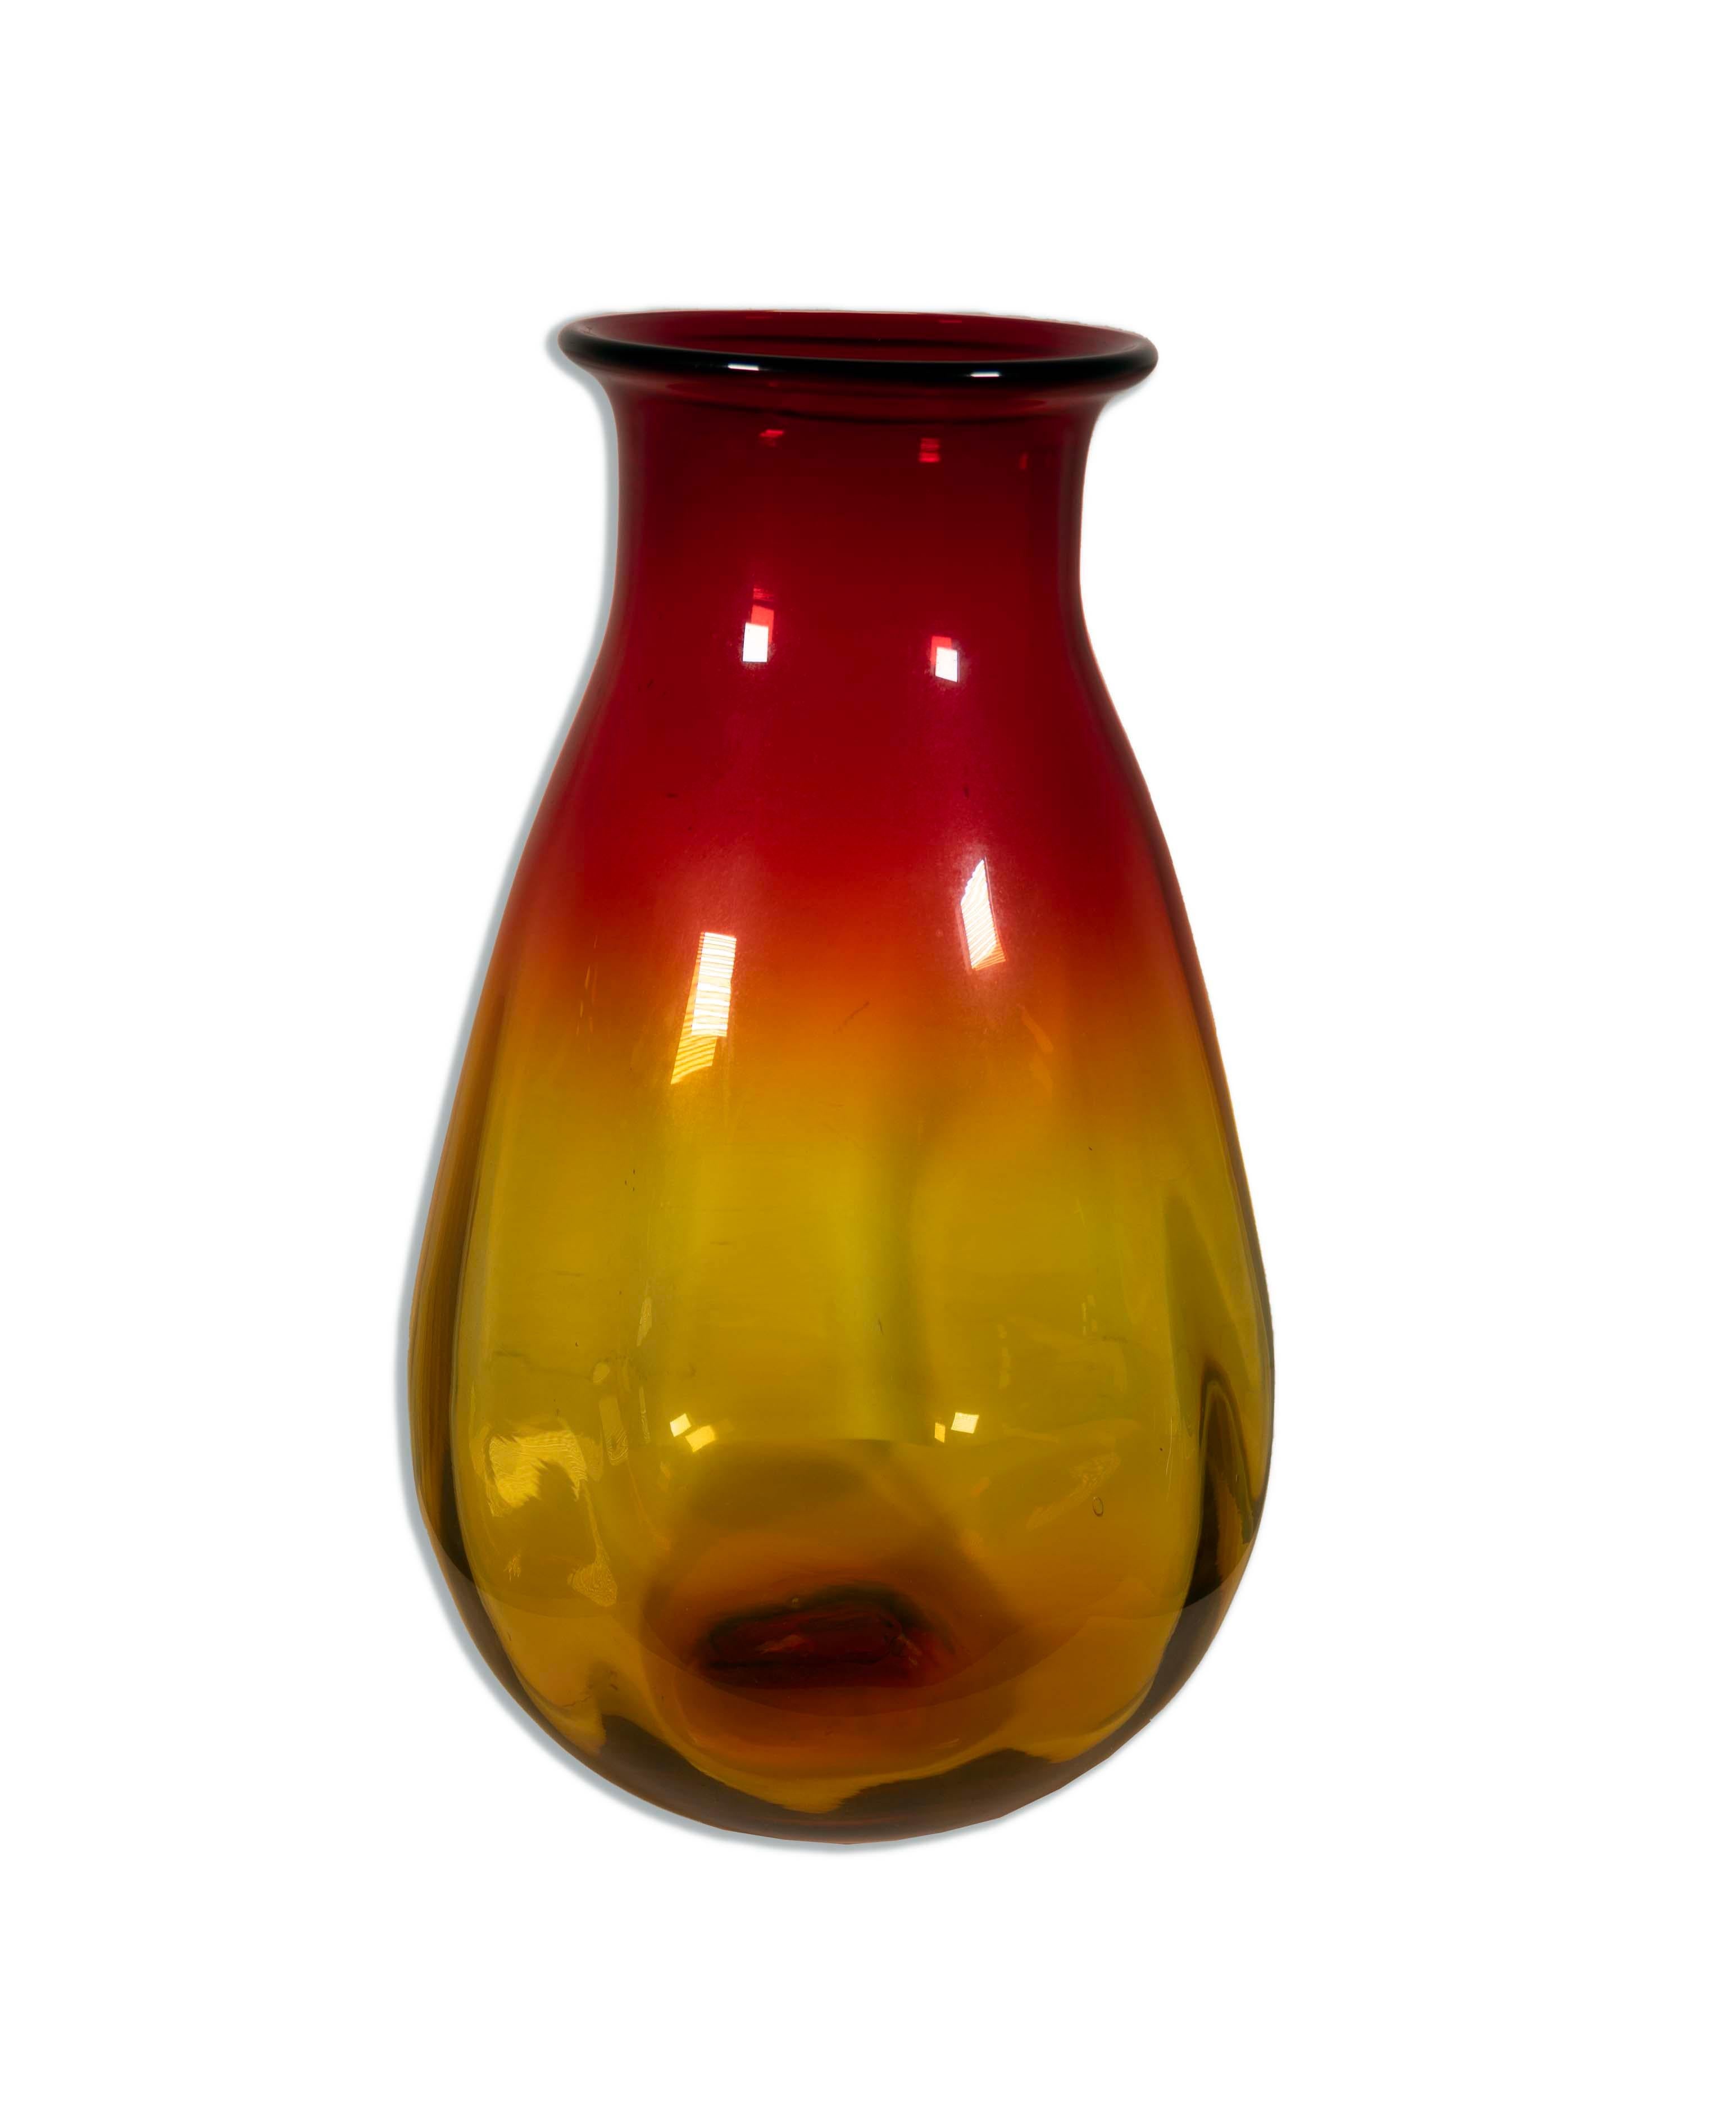 The Joel Myers for Blenko Red and Yellow Glass Vase, Model 7029, is a remarkable piece of mid-century modern glass artistry. Crafted by Joel Myers and the renowned Blenko Glass Company, this vase features a captivating, curvaceous form in a